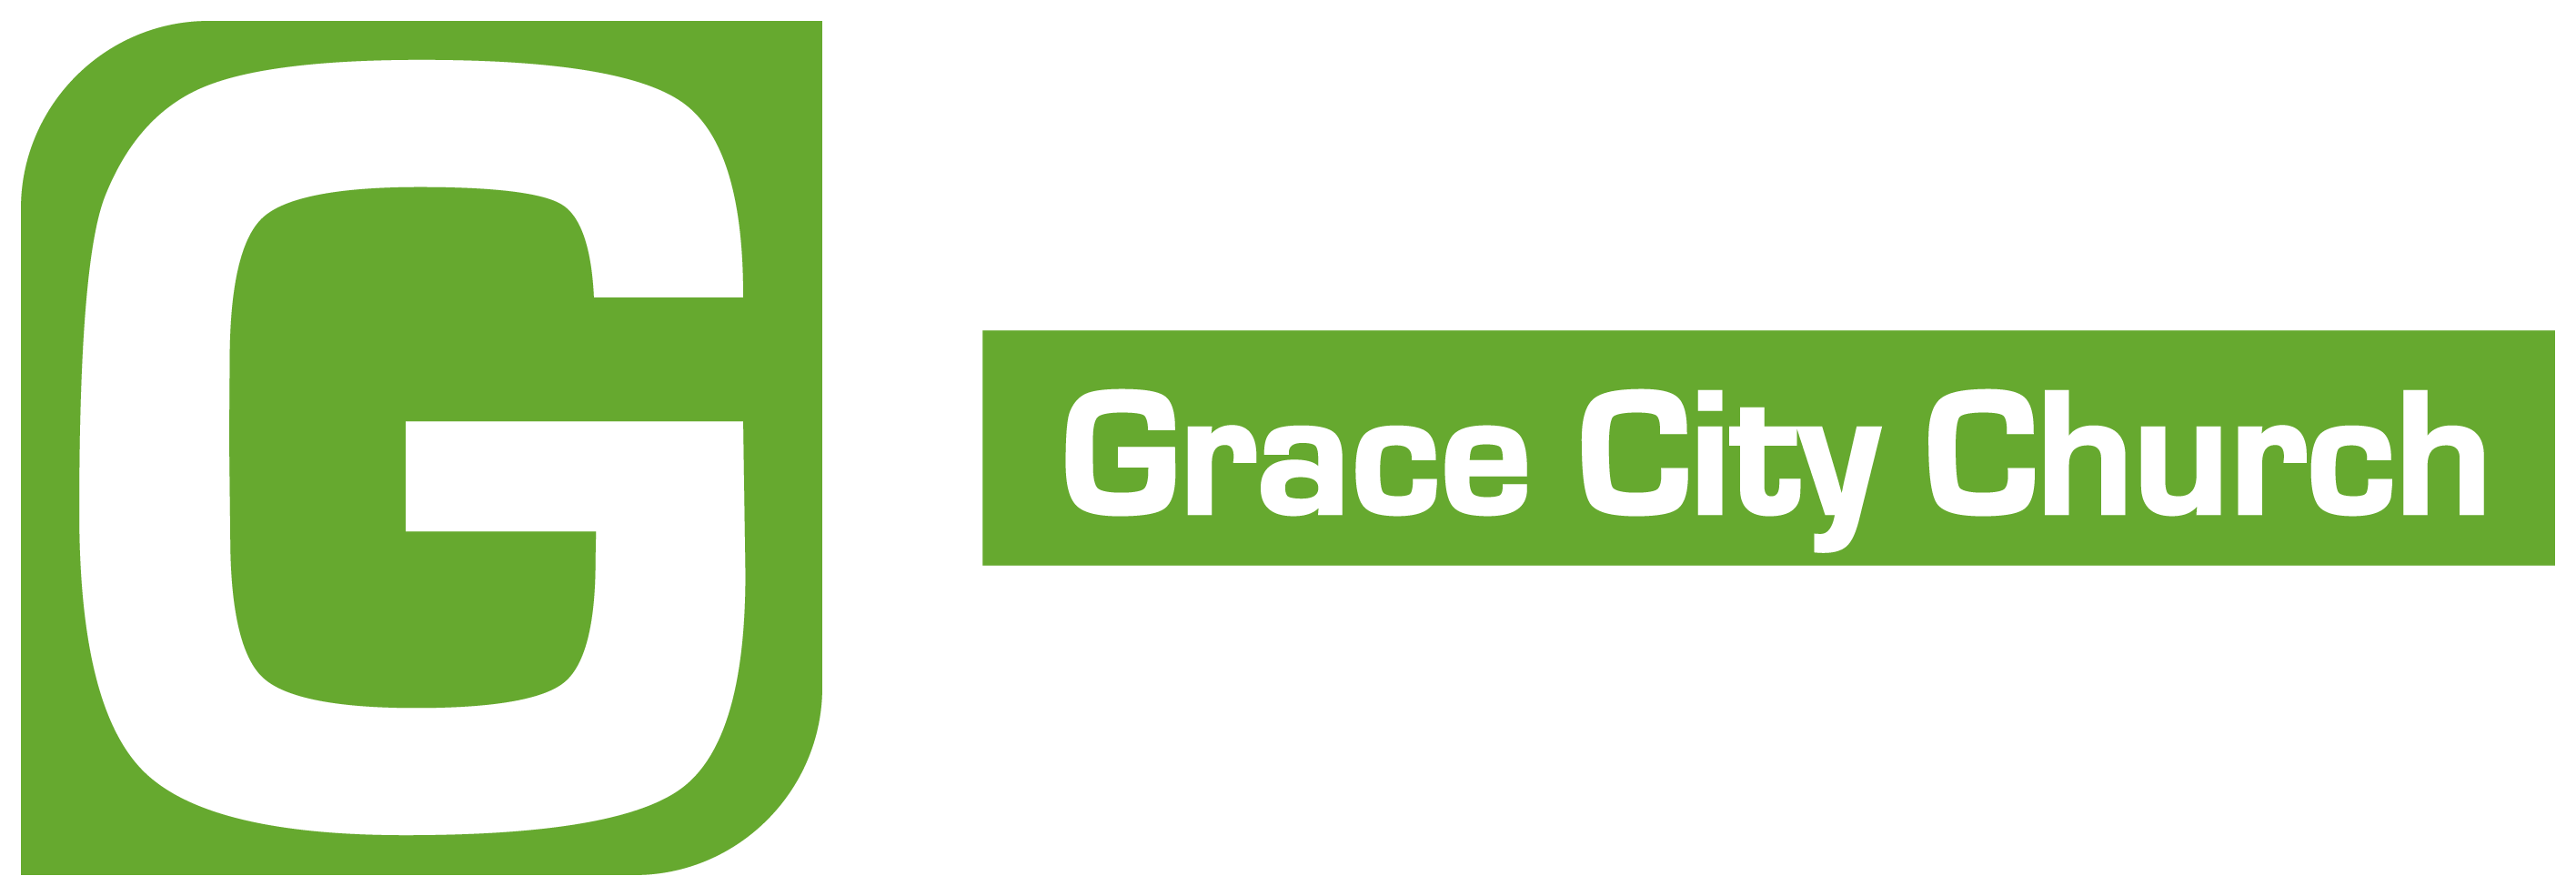 Grace City Church Food and Clothing